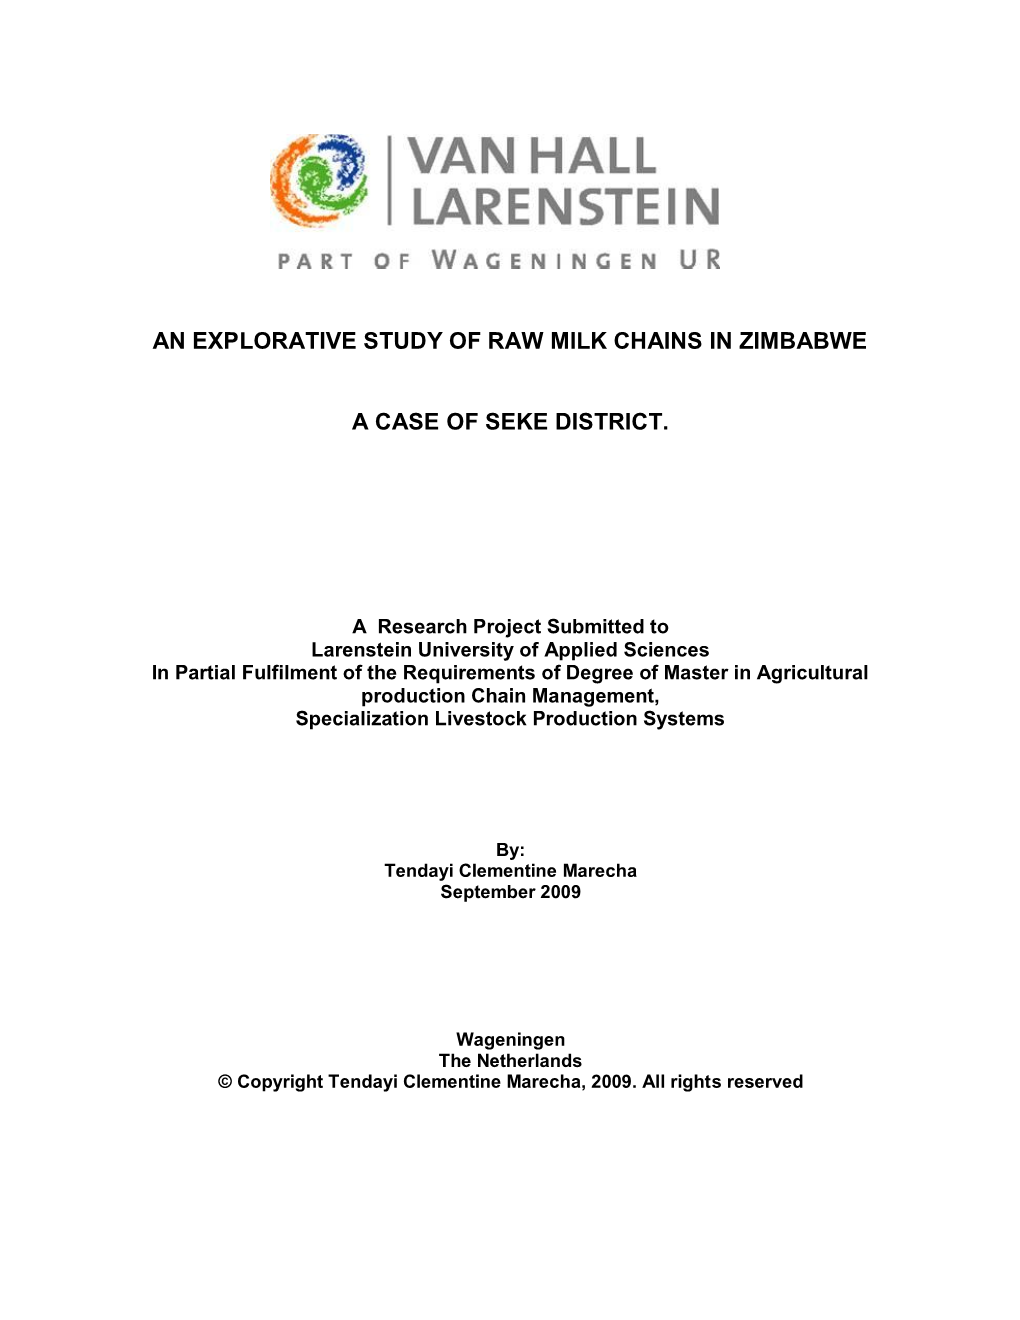 An Explorative Study of Raw Milk Chains in Zimbabwe a Case of Seke District